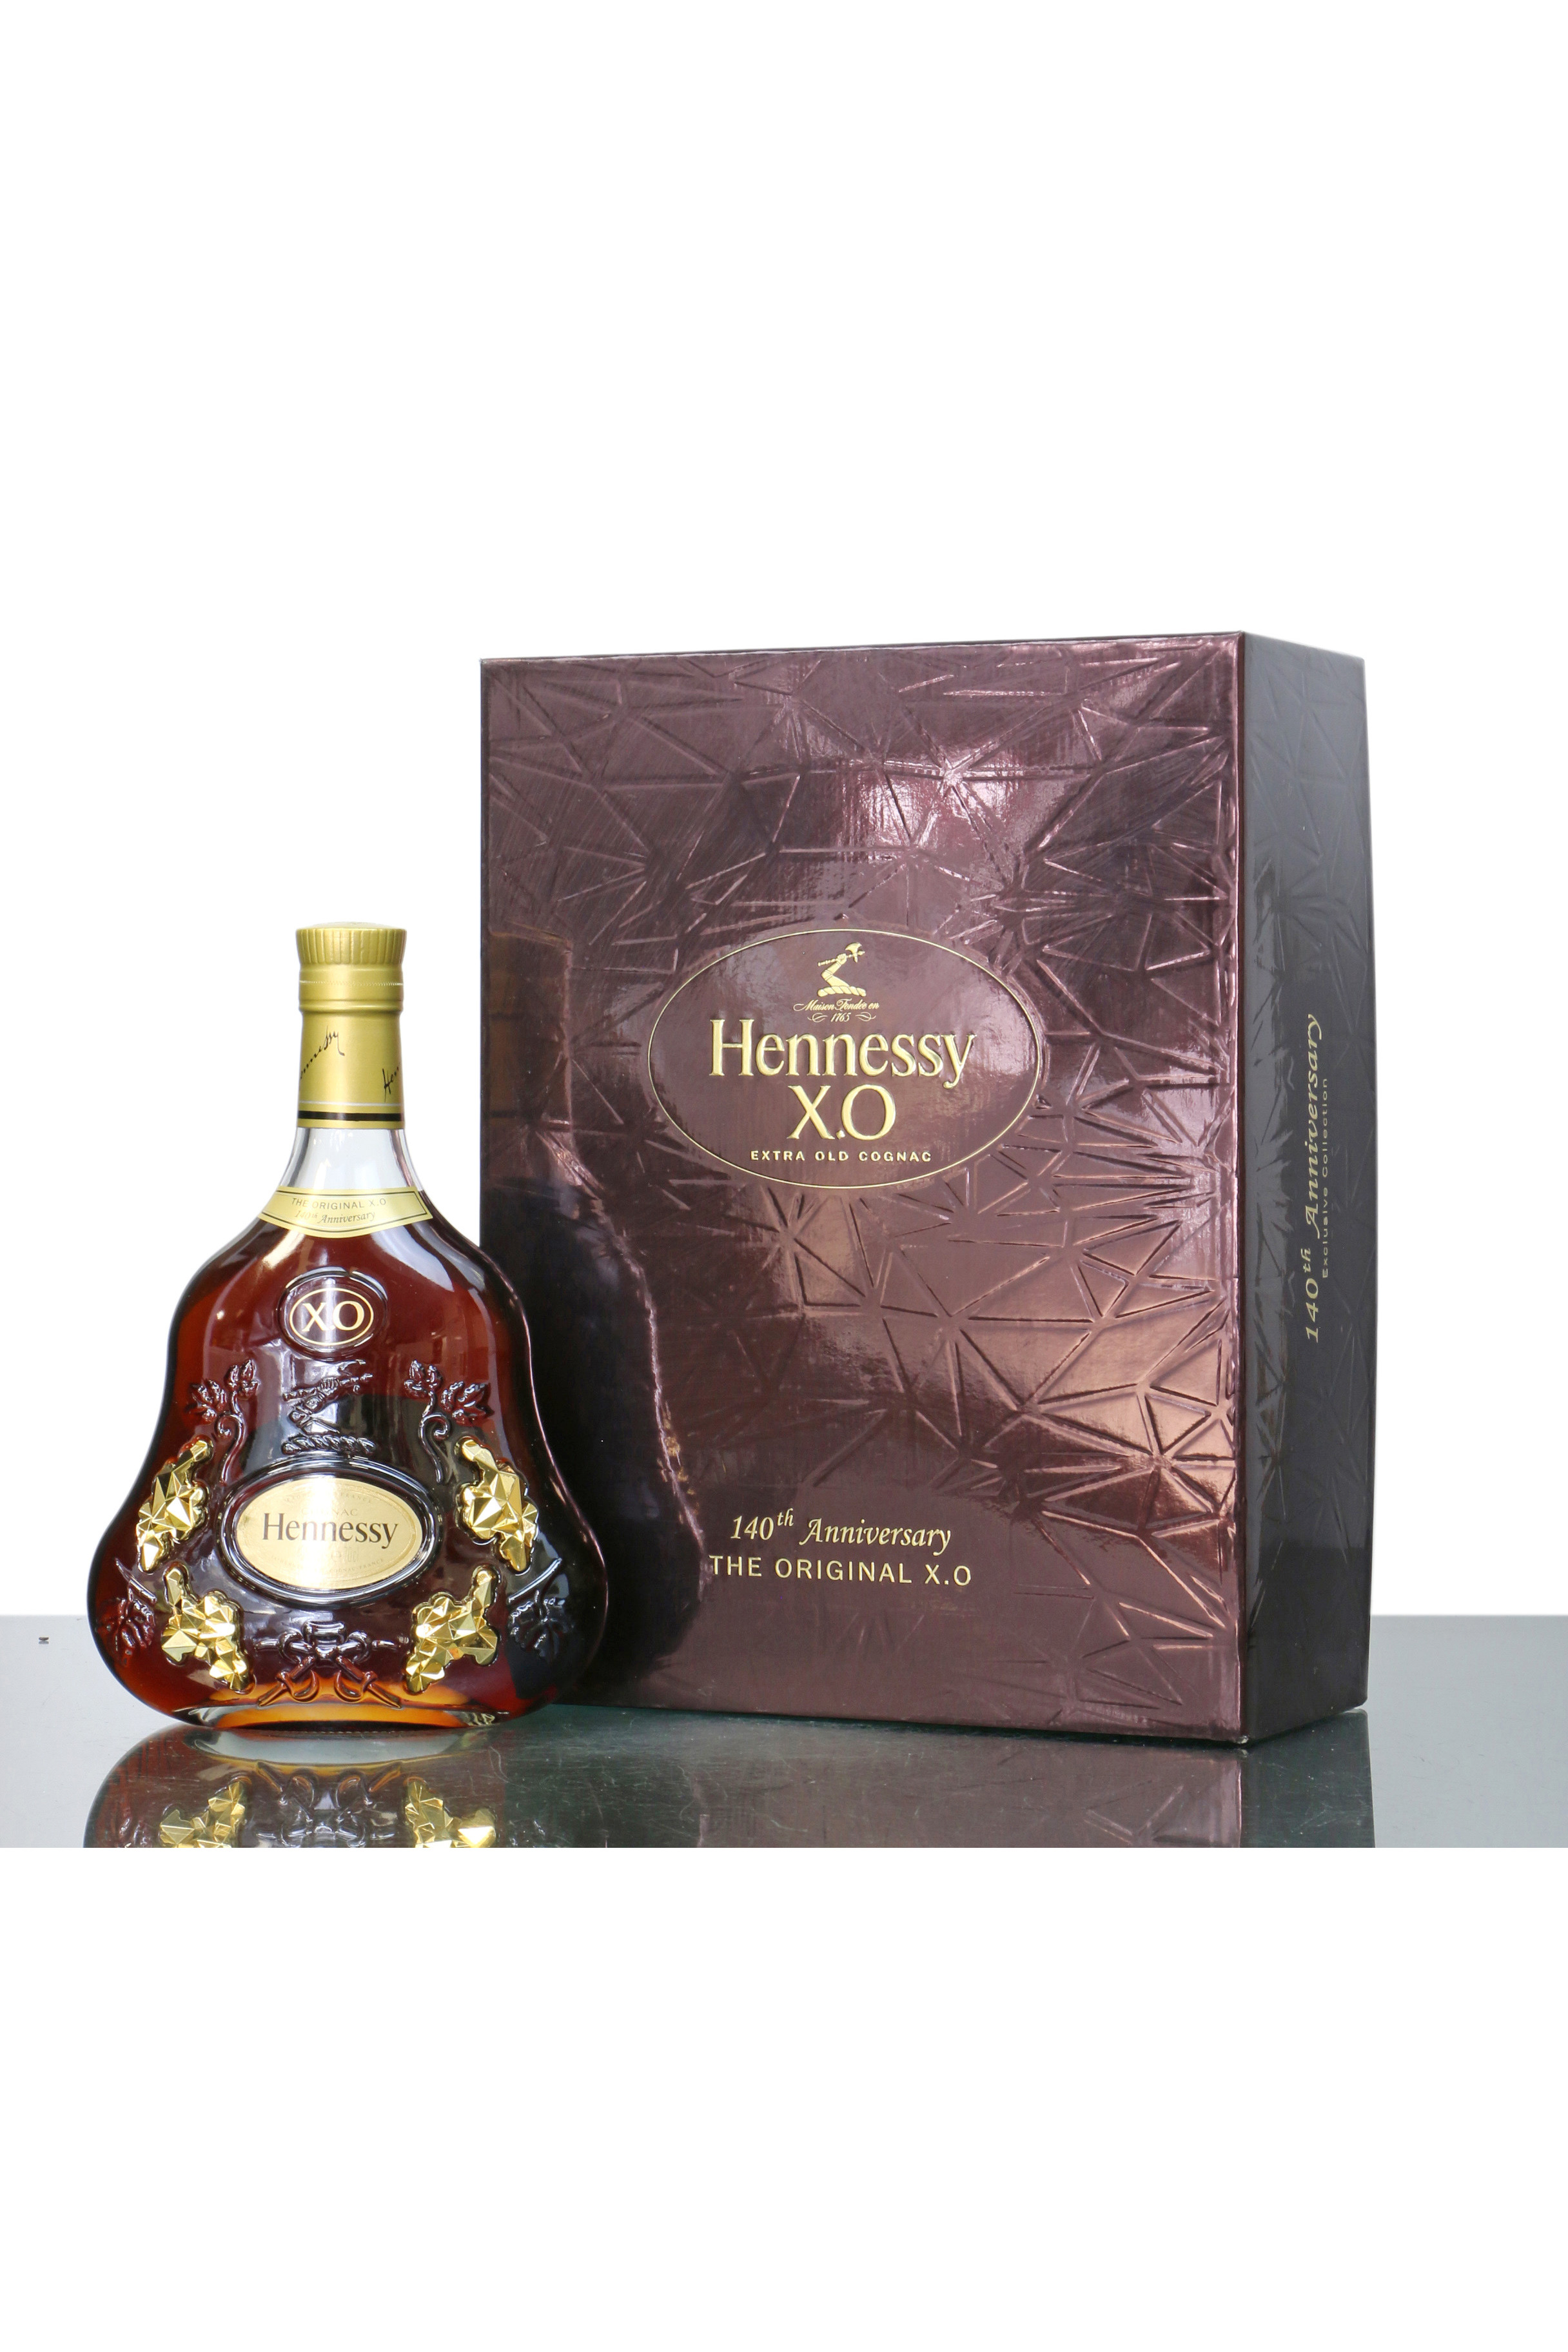 Hennessy The Original X.O - 140th Anniversary - France Exclusive 